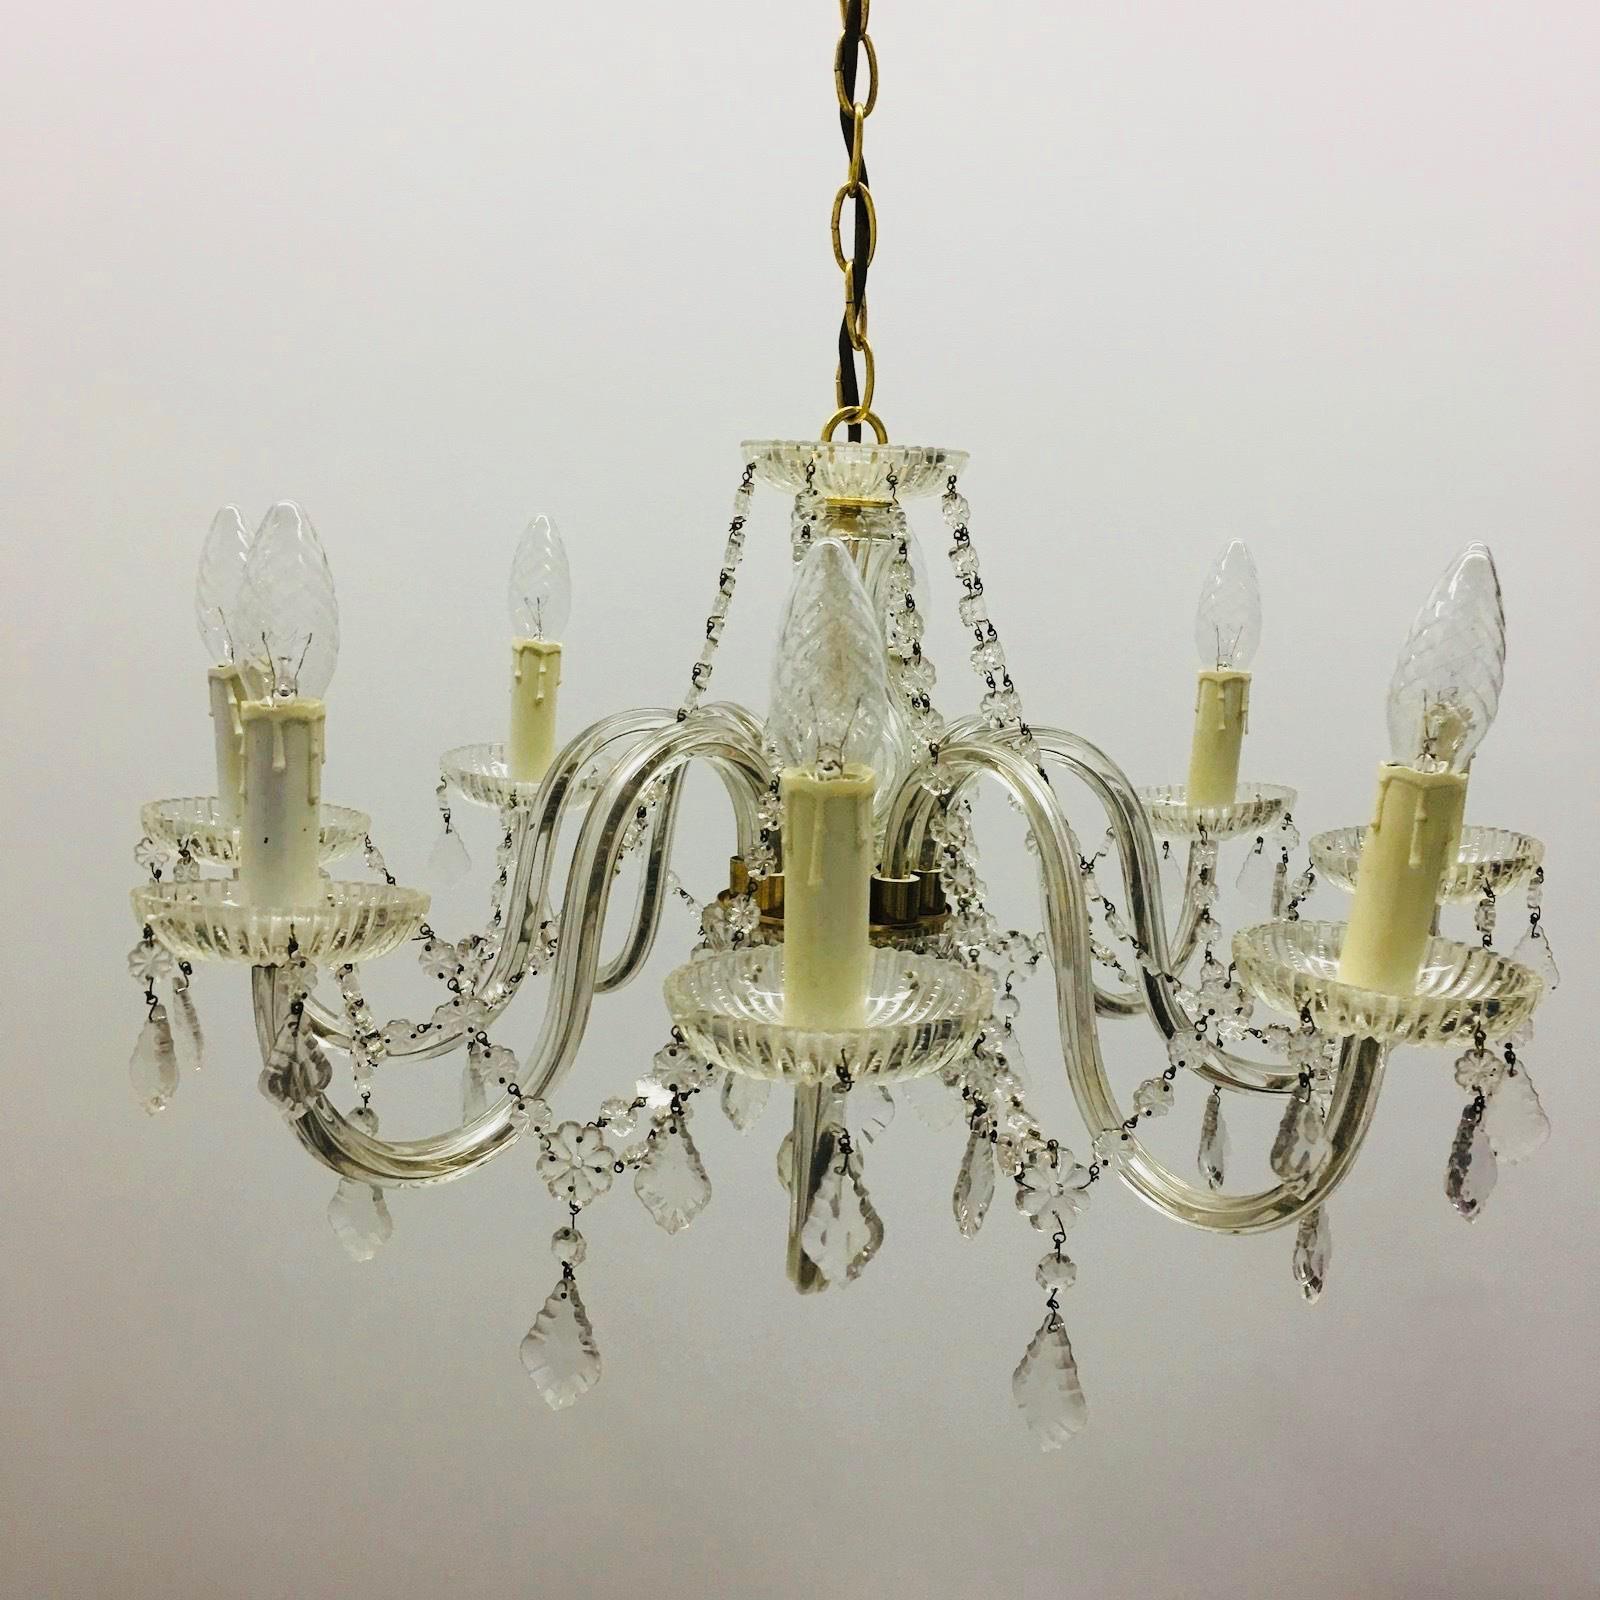 Gorgeous brass with cut crystal chandelier in Maria Theresa style made in the 1960s probably in Vienna. A beautiful form body. Eight flamed fitted with E14 sockets, rich hangings from the various faceted crystal. Found at an estate sale in Vienna,